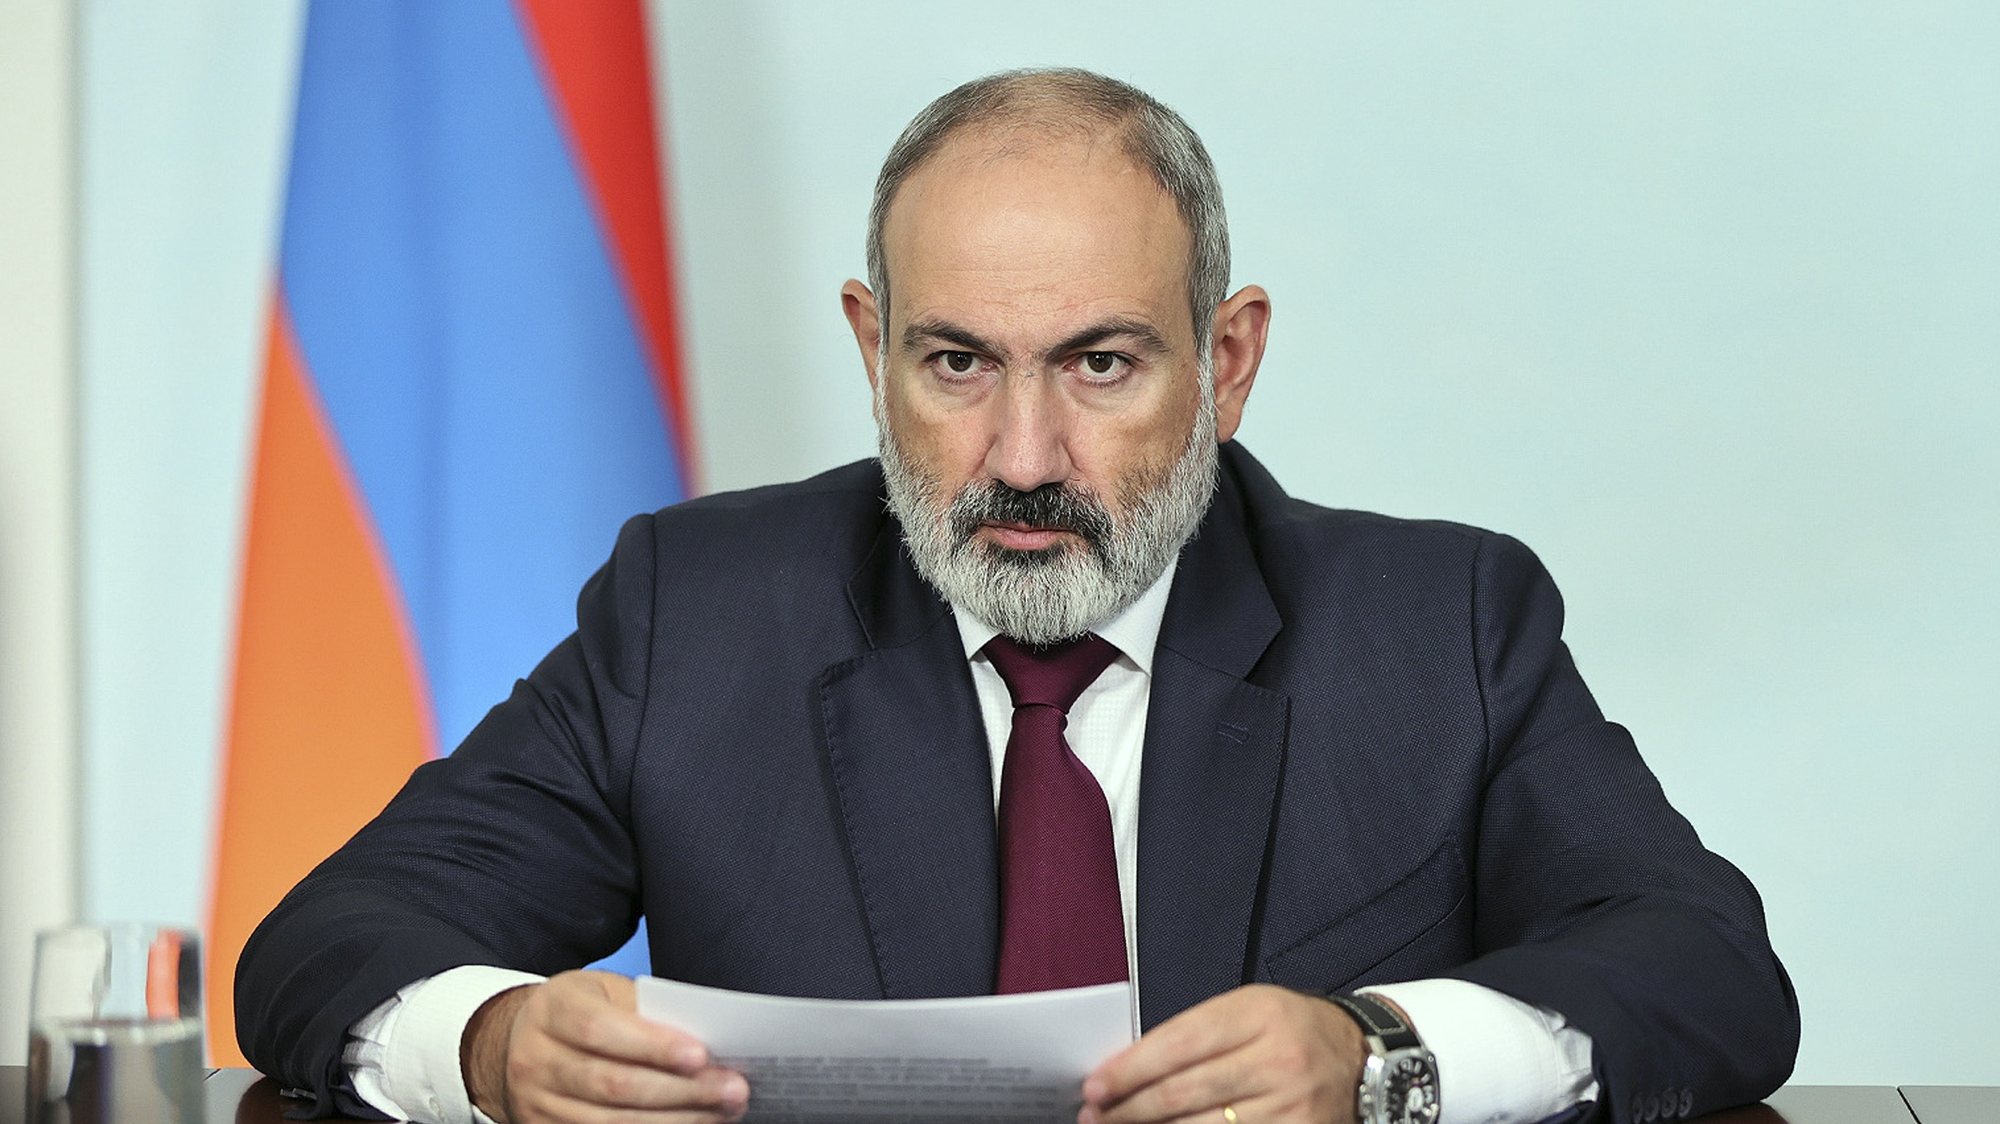 epa10880696 A handout picture made available by the Armenian Government&#039;s press service shows Armenian Prime Minister Nikol Pashinyan delivering his address to the nation in Yerevan, Armenia, 24 September 2023. &#039;Events in Nagorno-Karabakh have shown the ineffectiveness of the structures in which Armenia participates, and require a review of the entire security system&#039; - Pashinyan said on 24 September - adding that the Armenians of Karabakh are still &#039;under the threat of ethnic cleansing&#039;.  EPA/ARMENIAN GOVERMENT PRESS SERVICE/HANDOUT HANDOUT HANDOUT EDITORIAL USE ONLY/NO SALES HANDOUT EDITORIAL USE ONLY/NO SALES